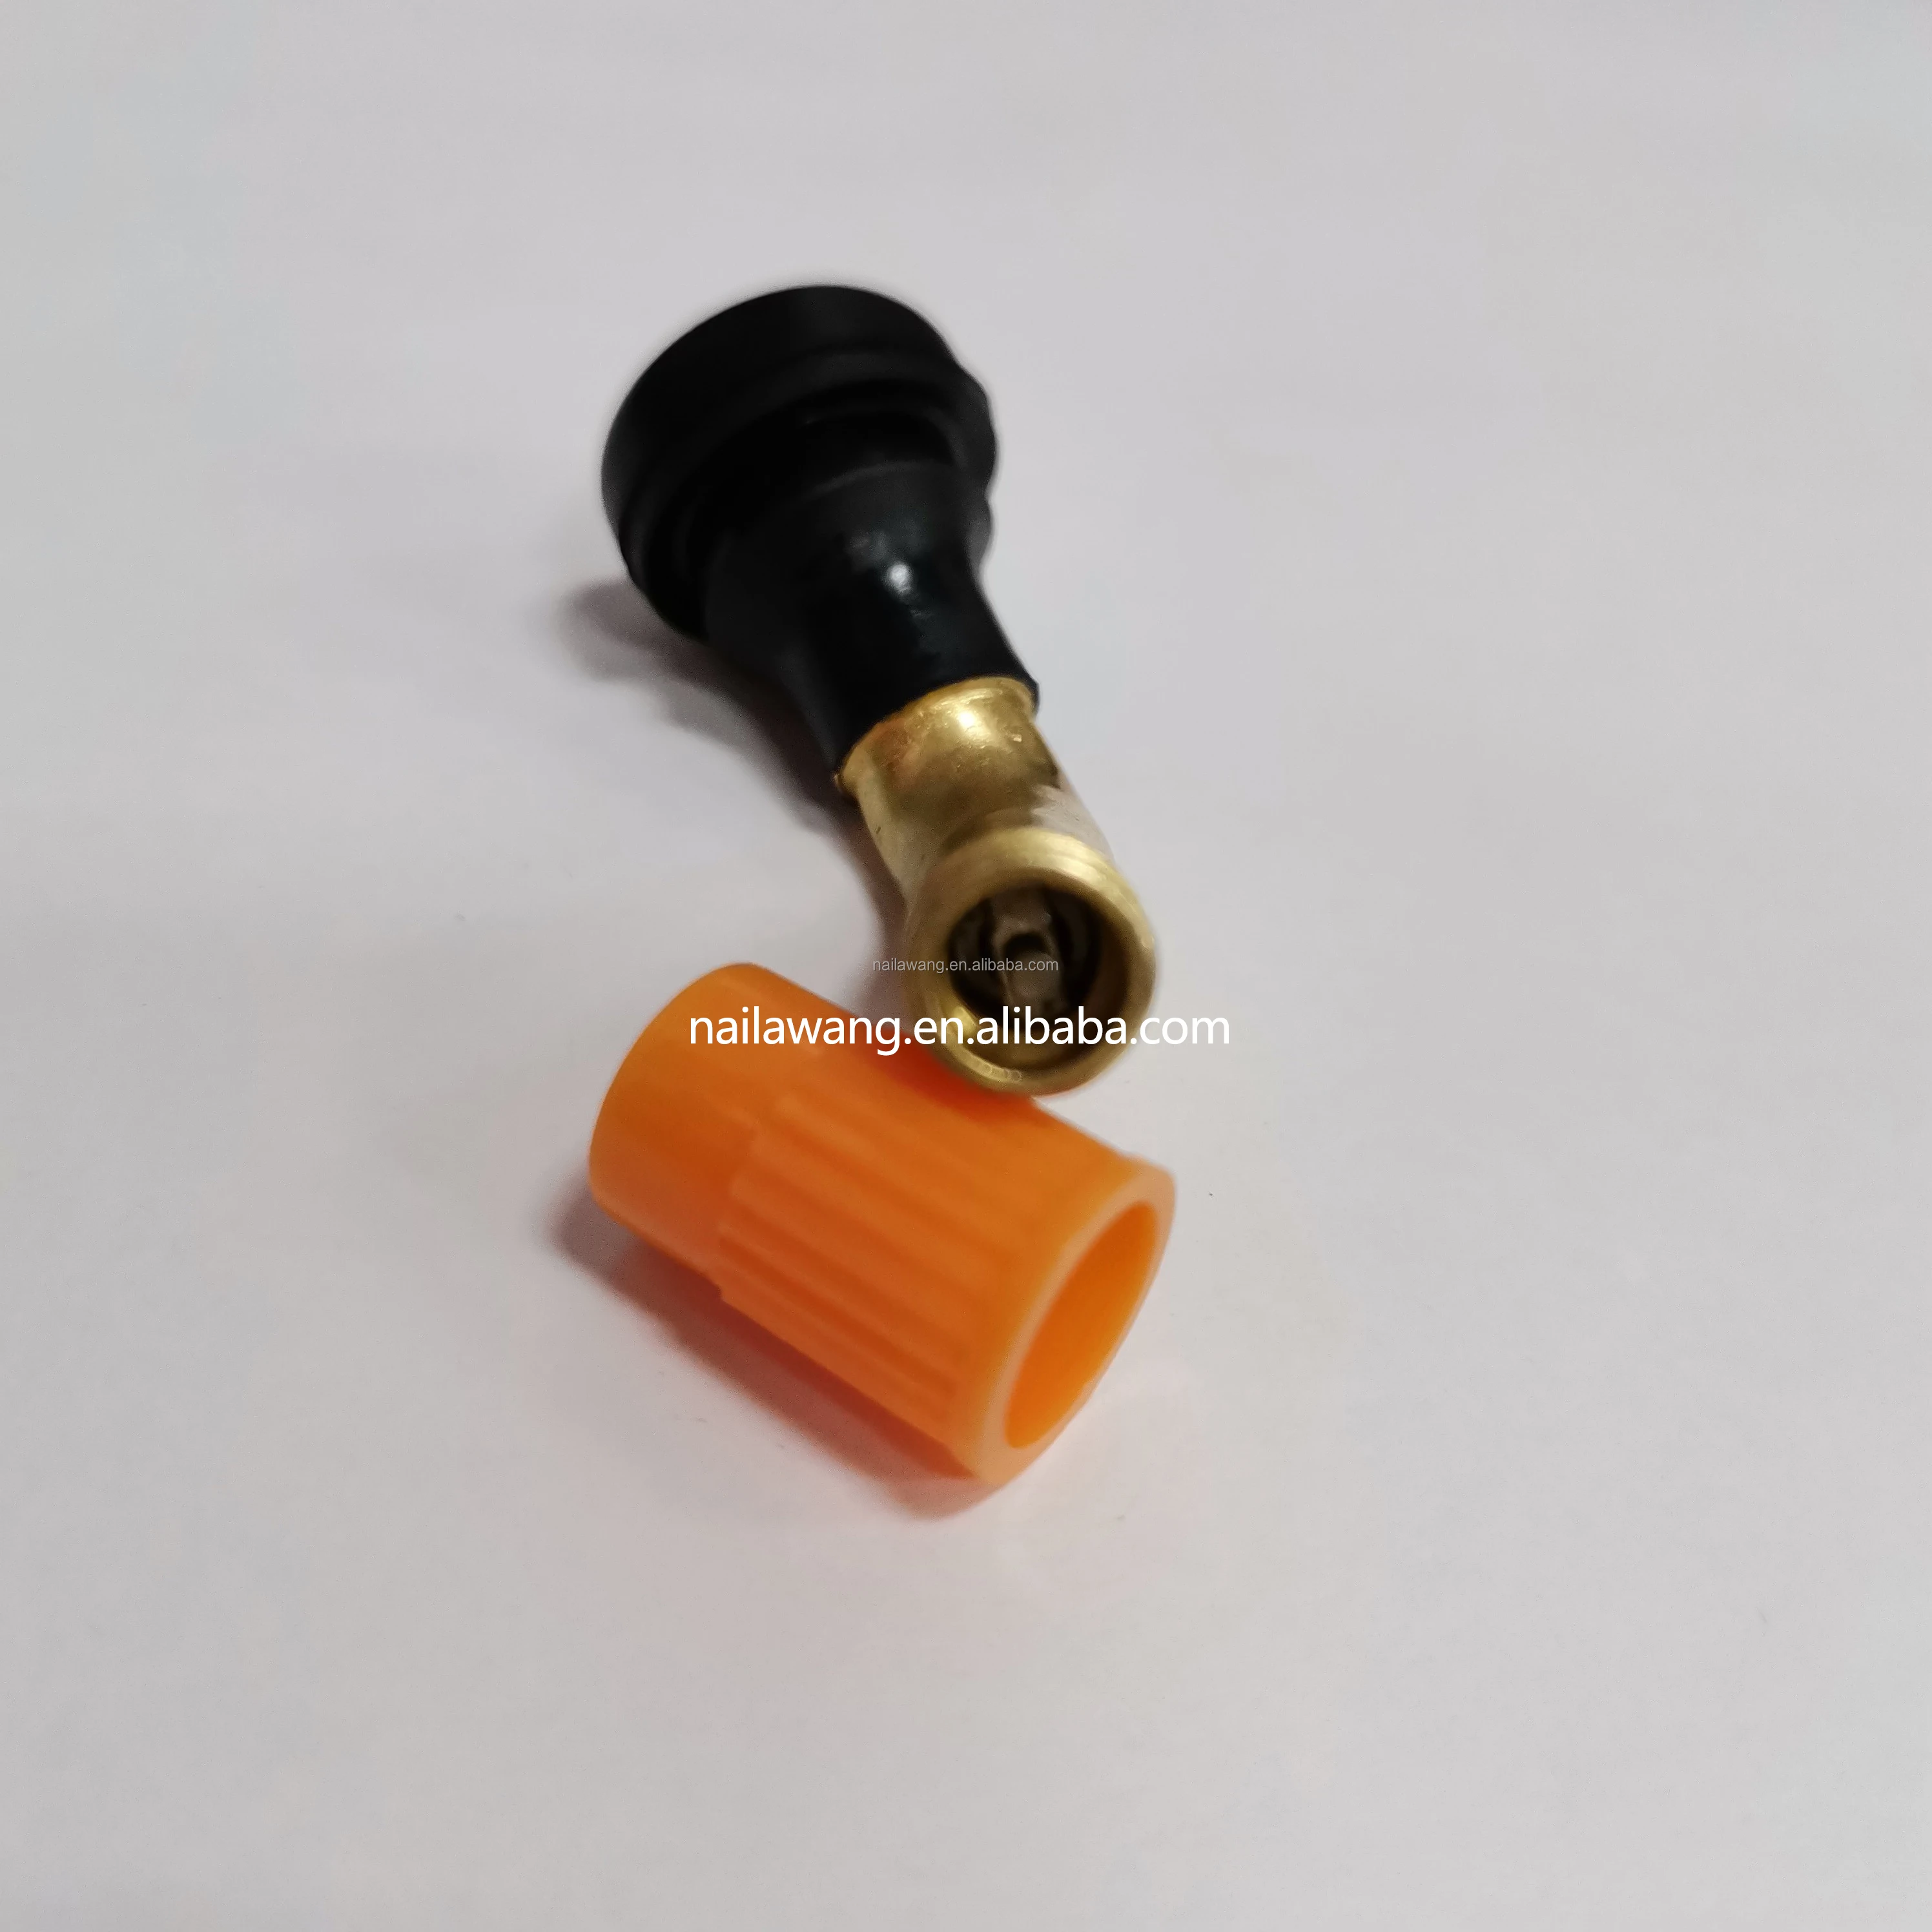 Universal Brass Stem Cap Rubber Tubeless 45 Degree PVR50 Tire Valve  for Electric Motorcycle Scooter